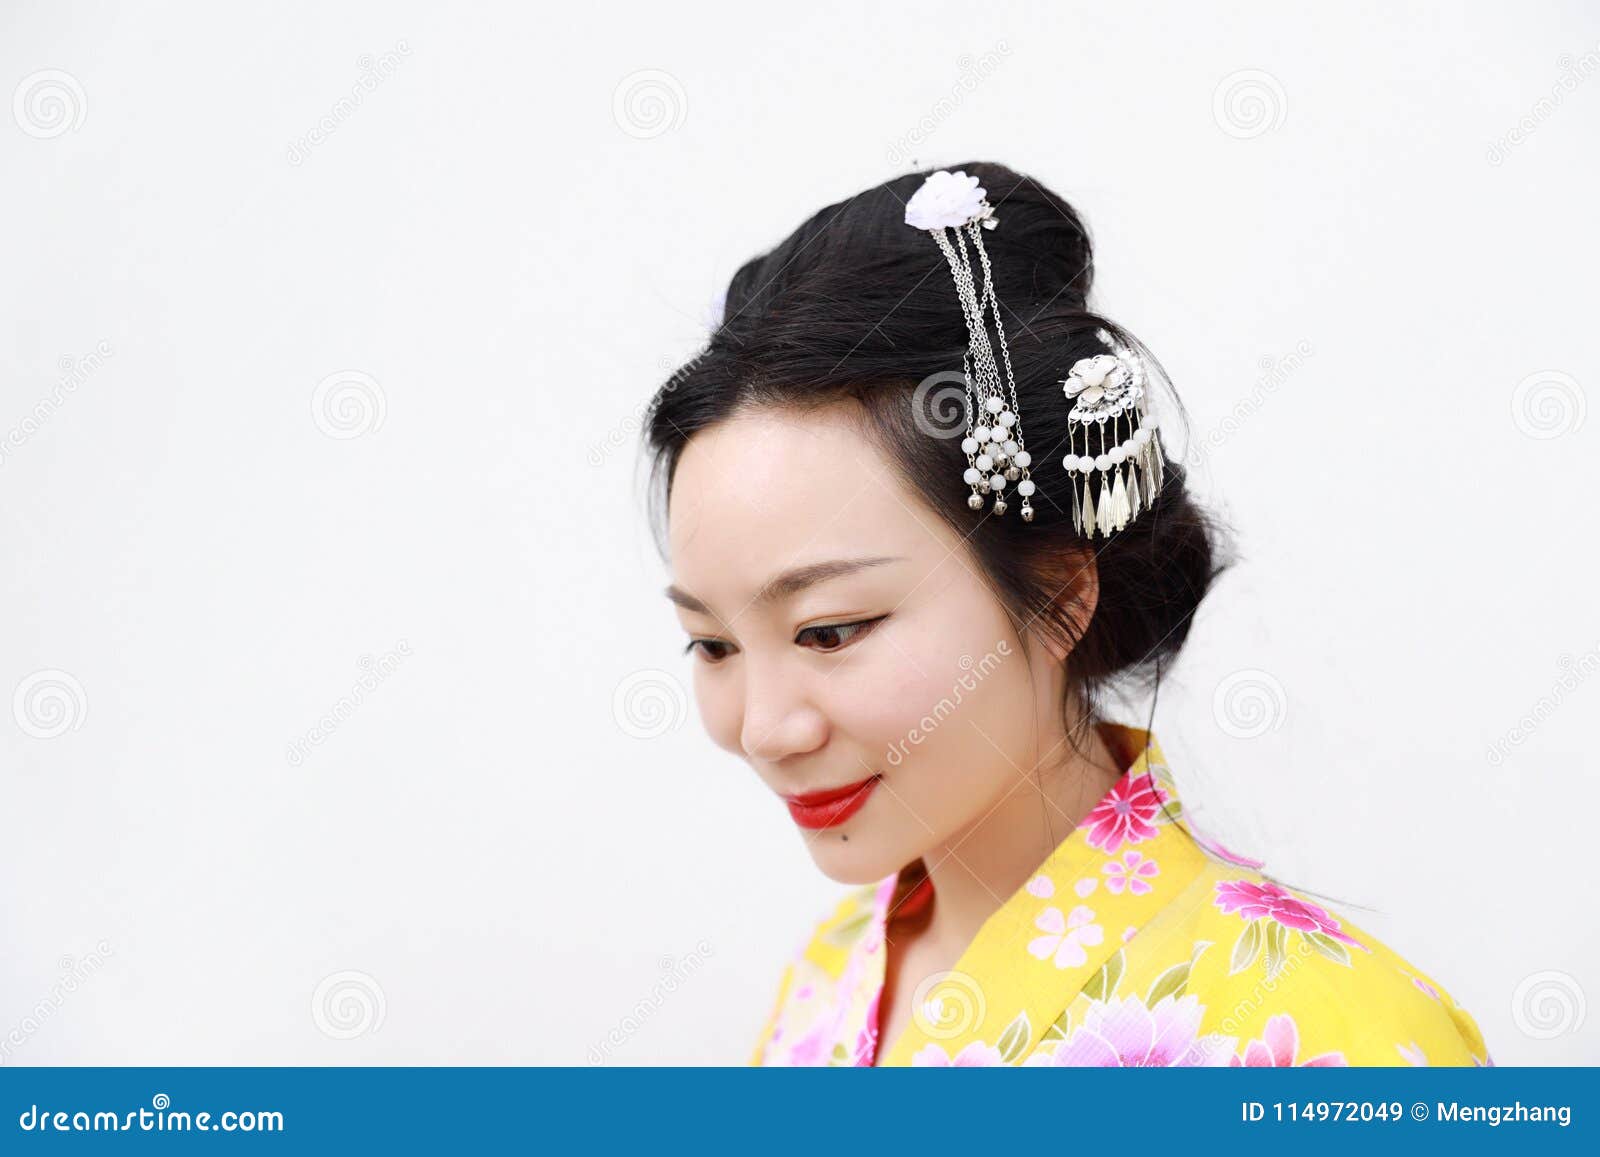 Traditional Asian Japanese Woman With Kimono On Isolated White